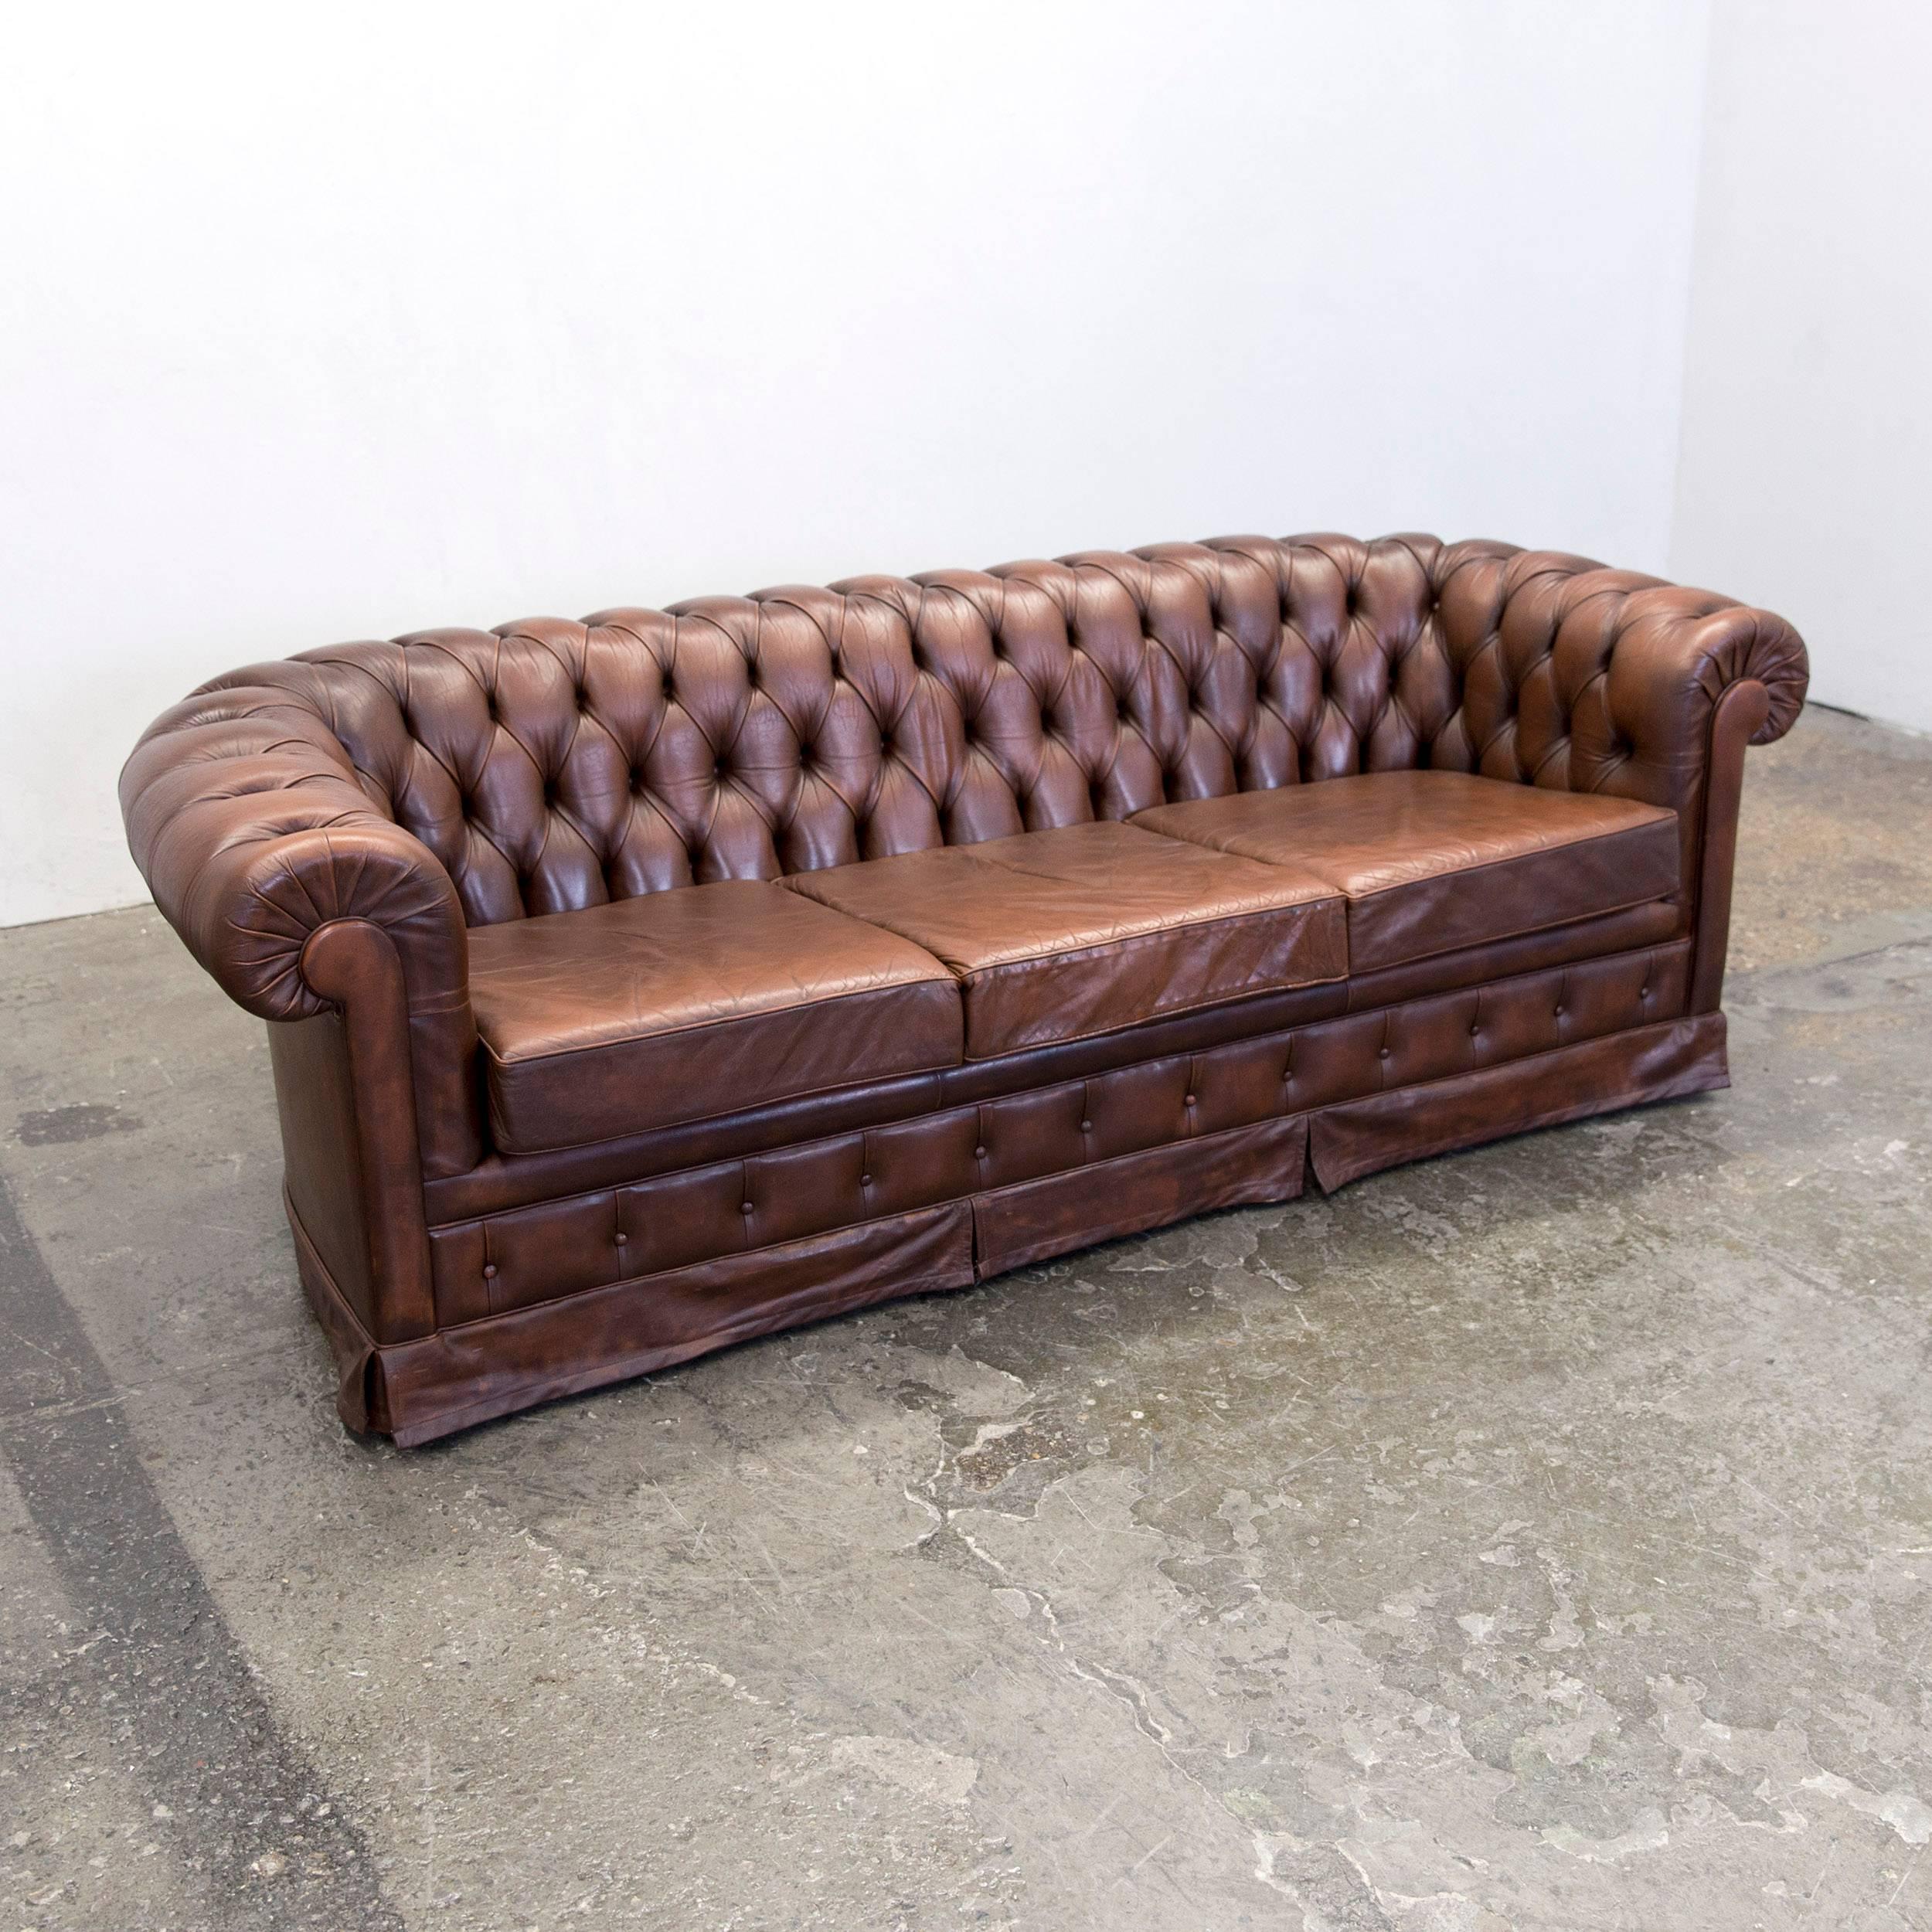 Contemporary Original Chesterfield Leather Sofa Two-Seat Couch Brown Vintage Retro